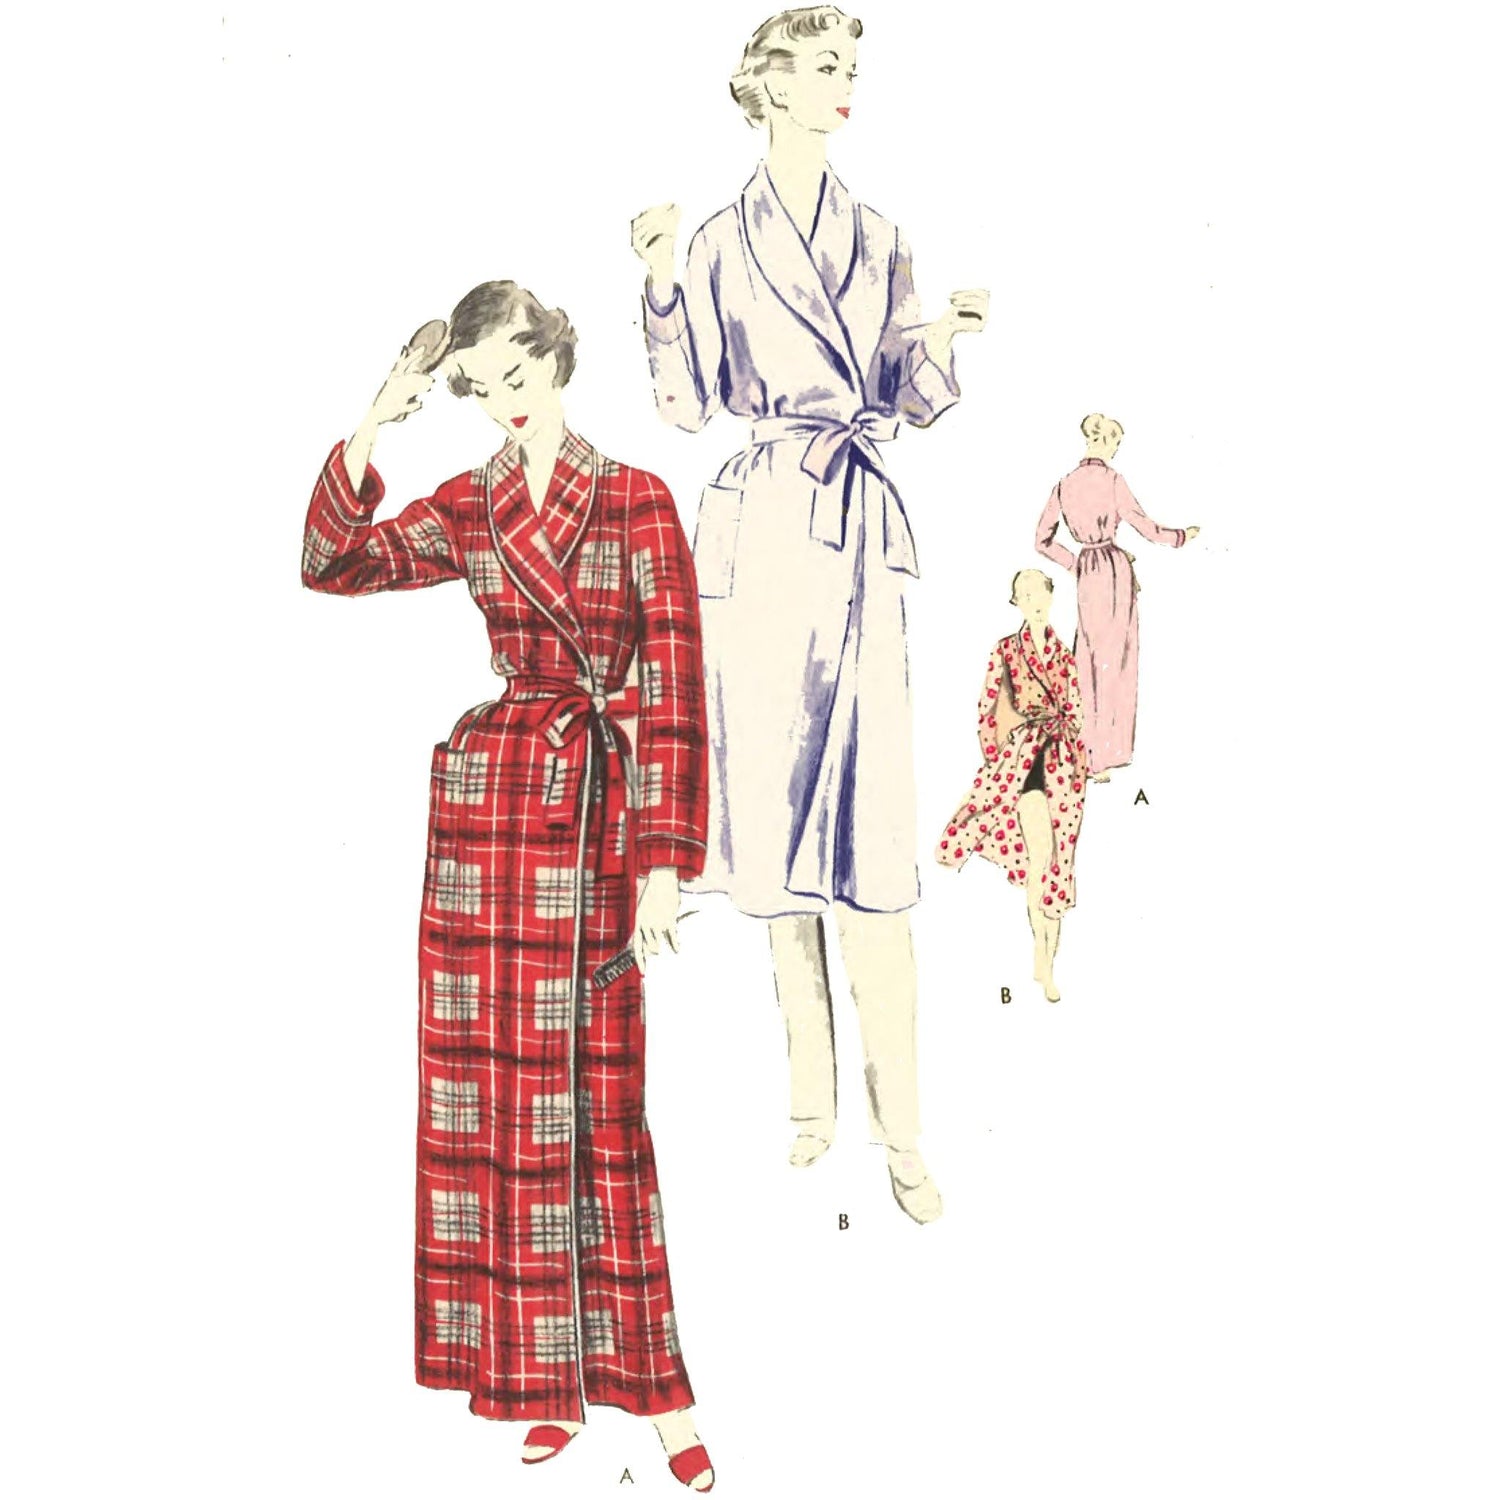 Women wearing dressing gowns, one floor length and one knee length,